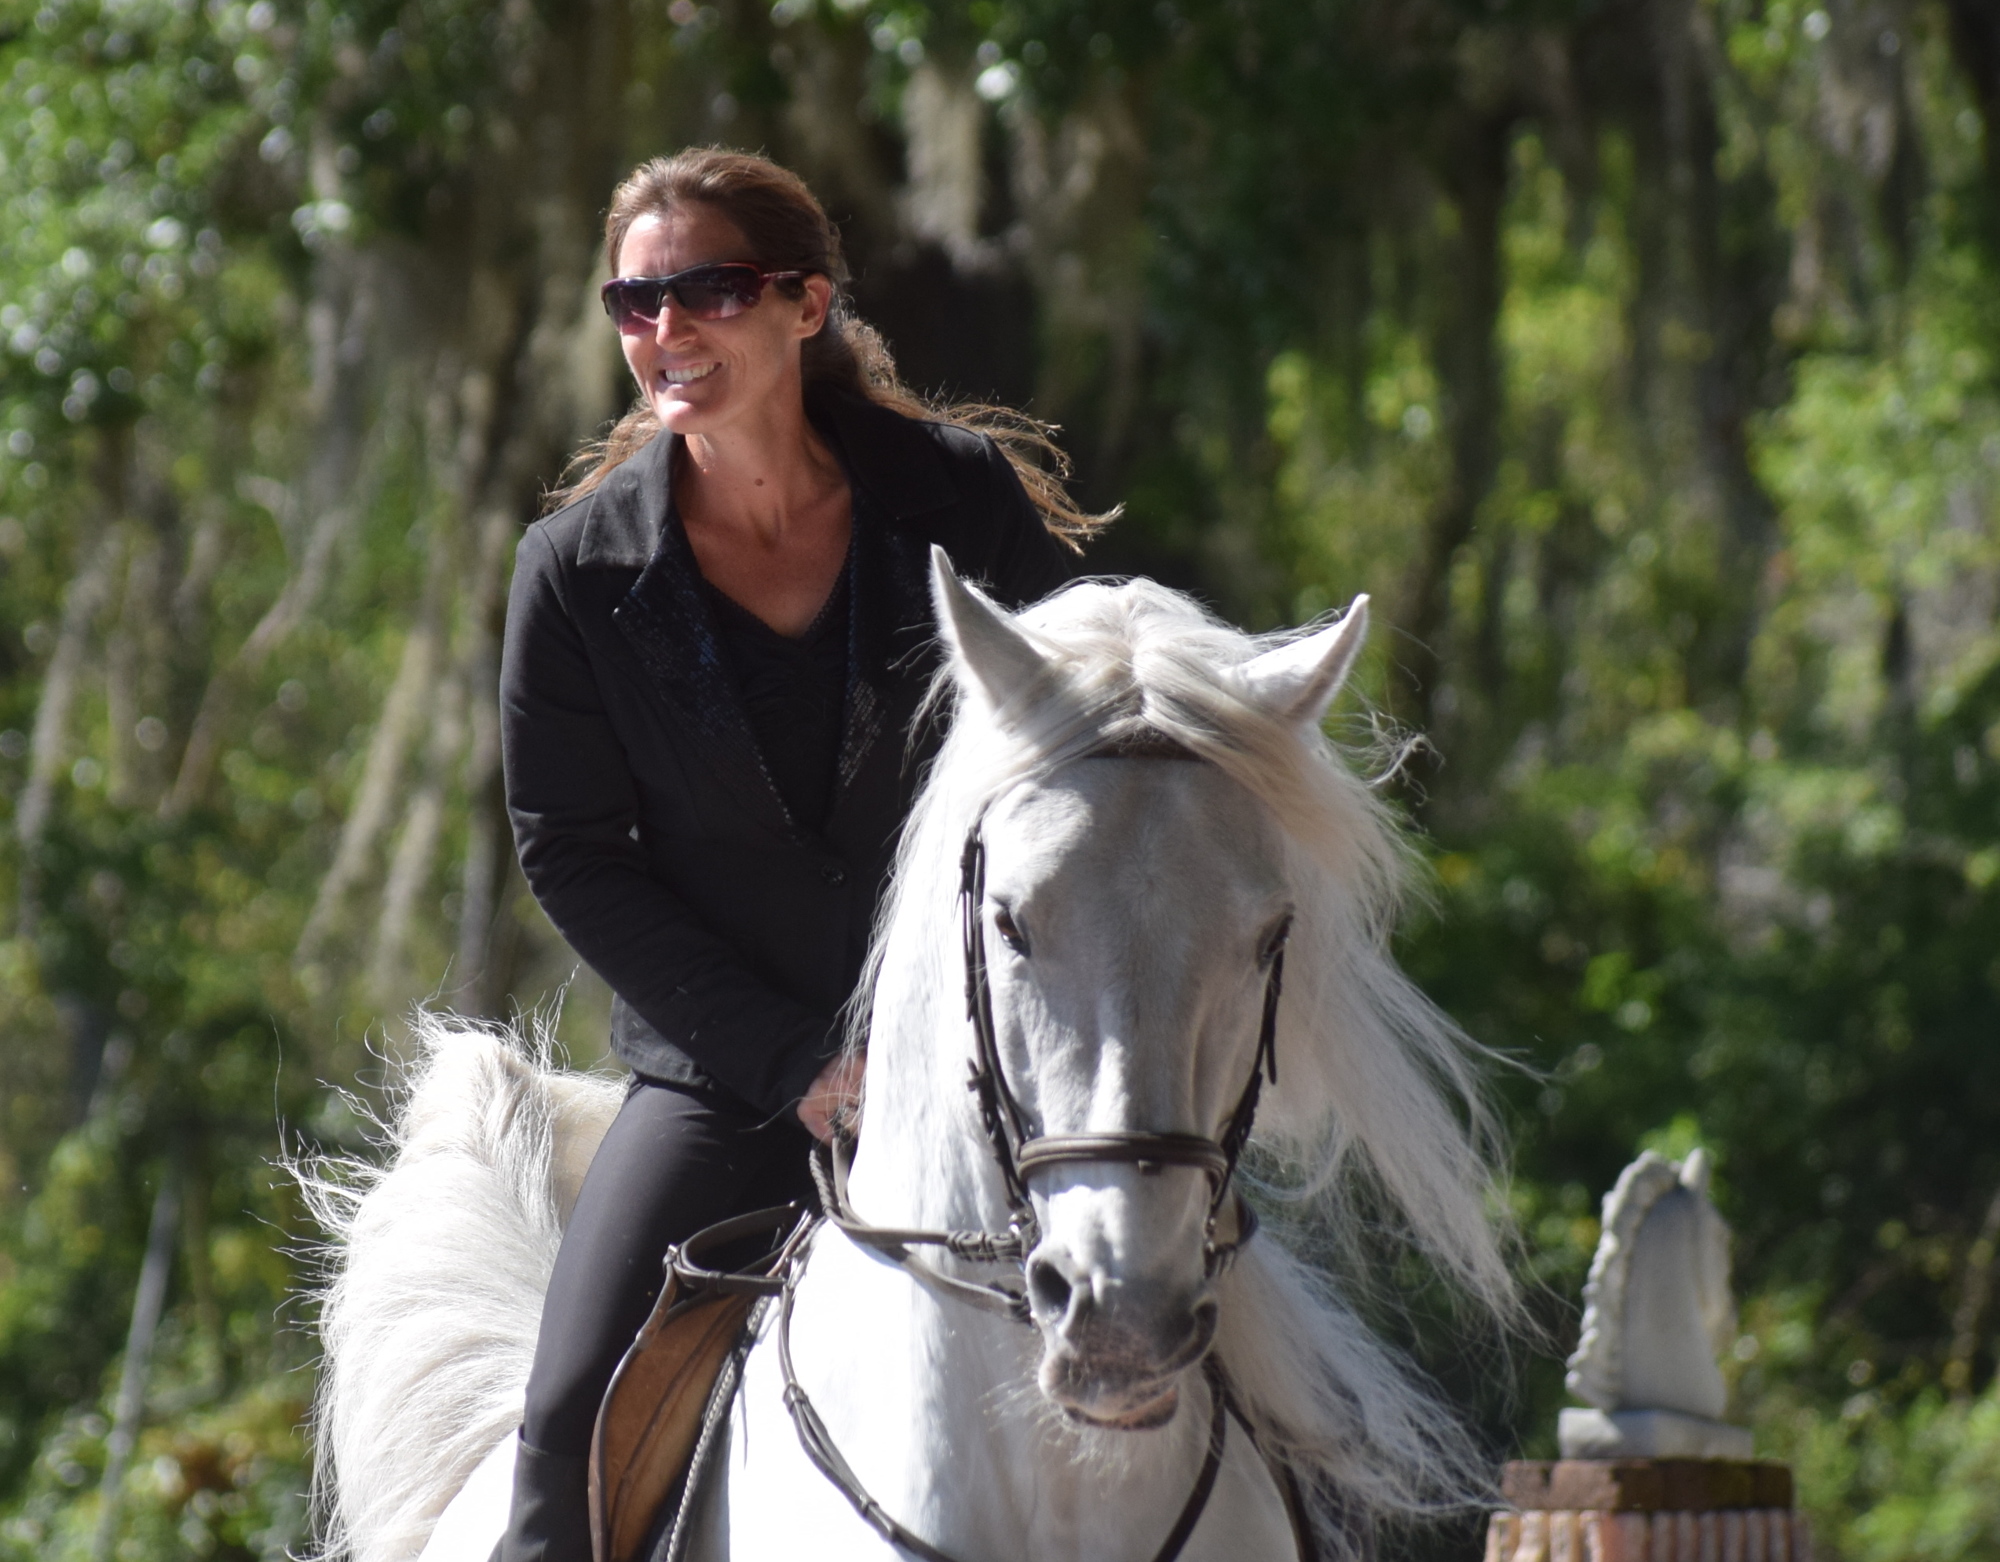 Rebecca McCullough says the show will go on at Royal Lipizzan Stallions in Myakka City.